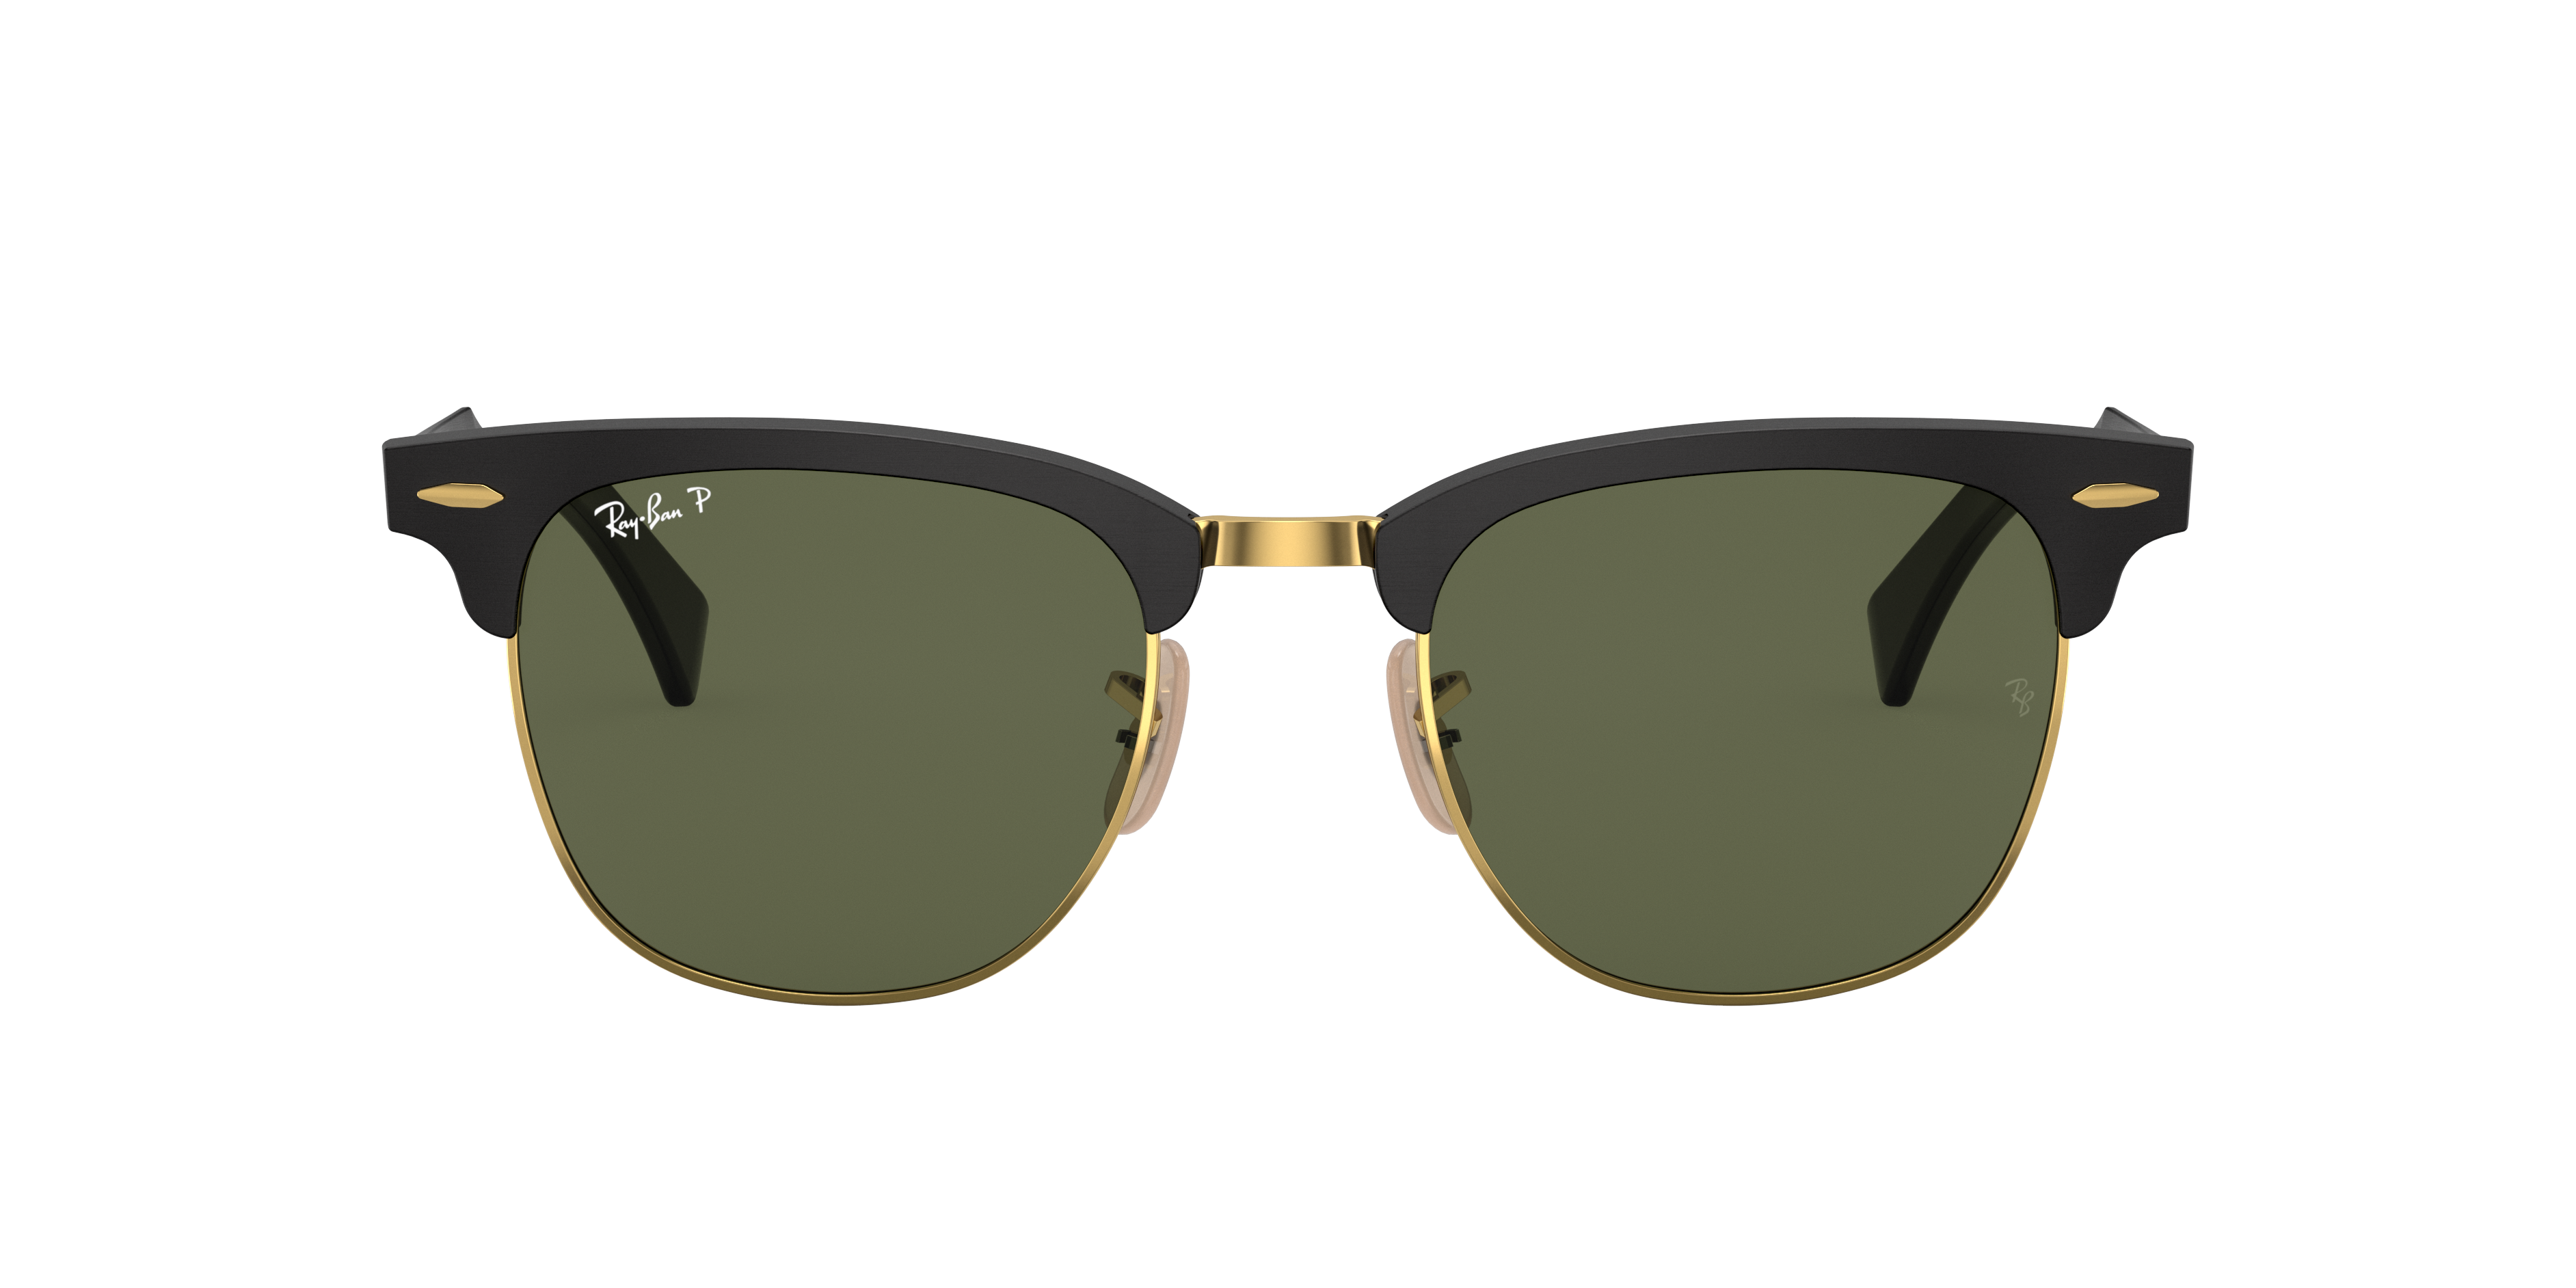 Ray ban стекло. Ray-ban 3016 clubmaster w0365. Ray-ban 0rb3016 / 51 901/58. Очки ray ban 3016 w0365. Ray ban Aluminium clubmaster rb3507 137/40.